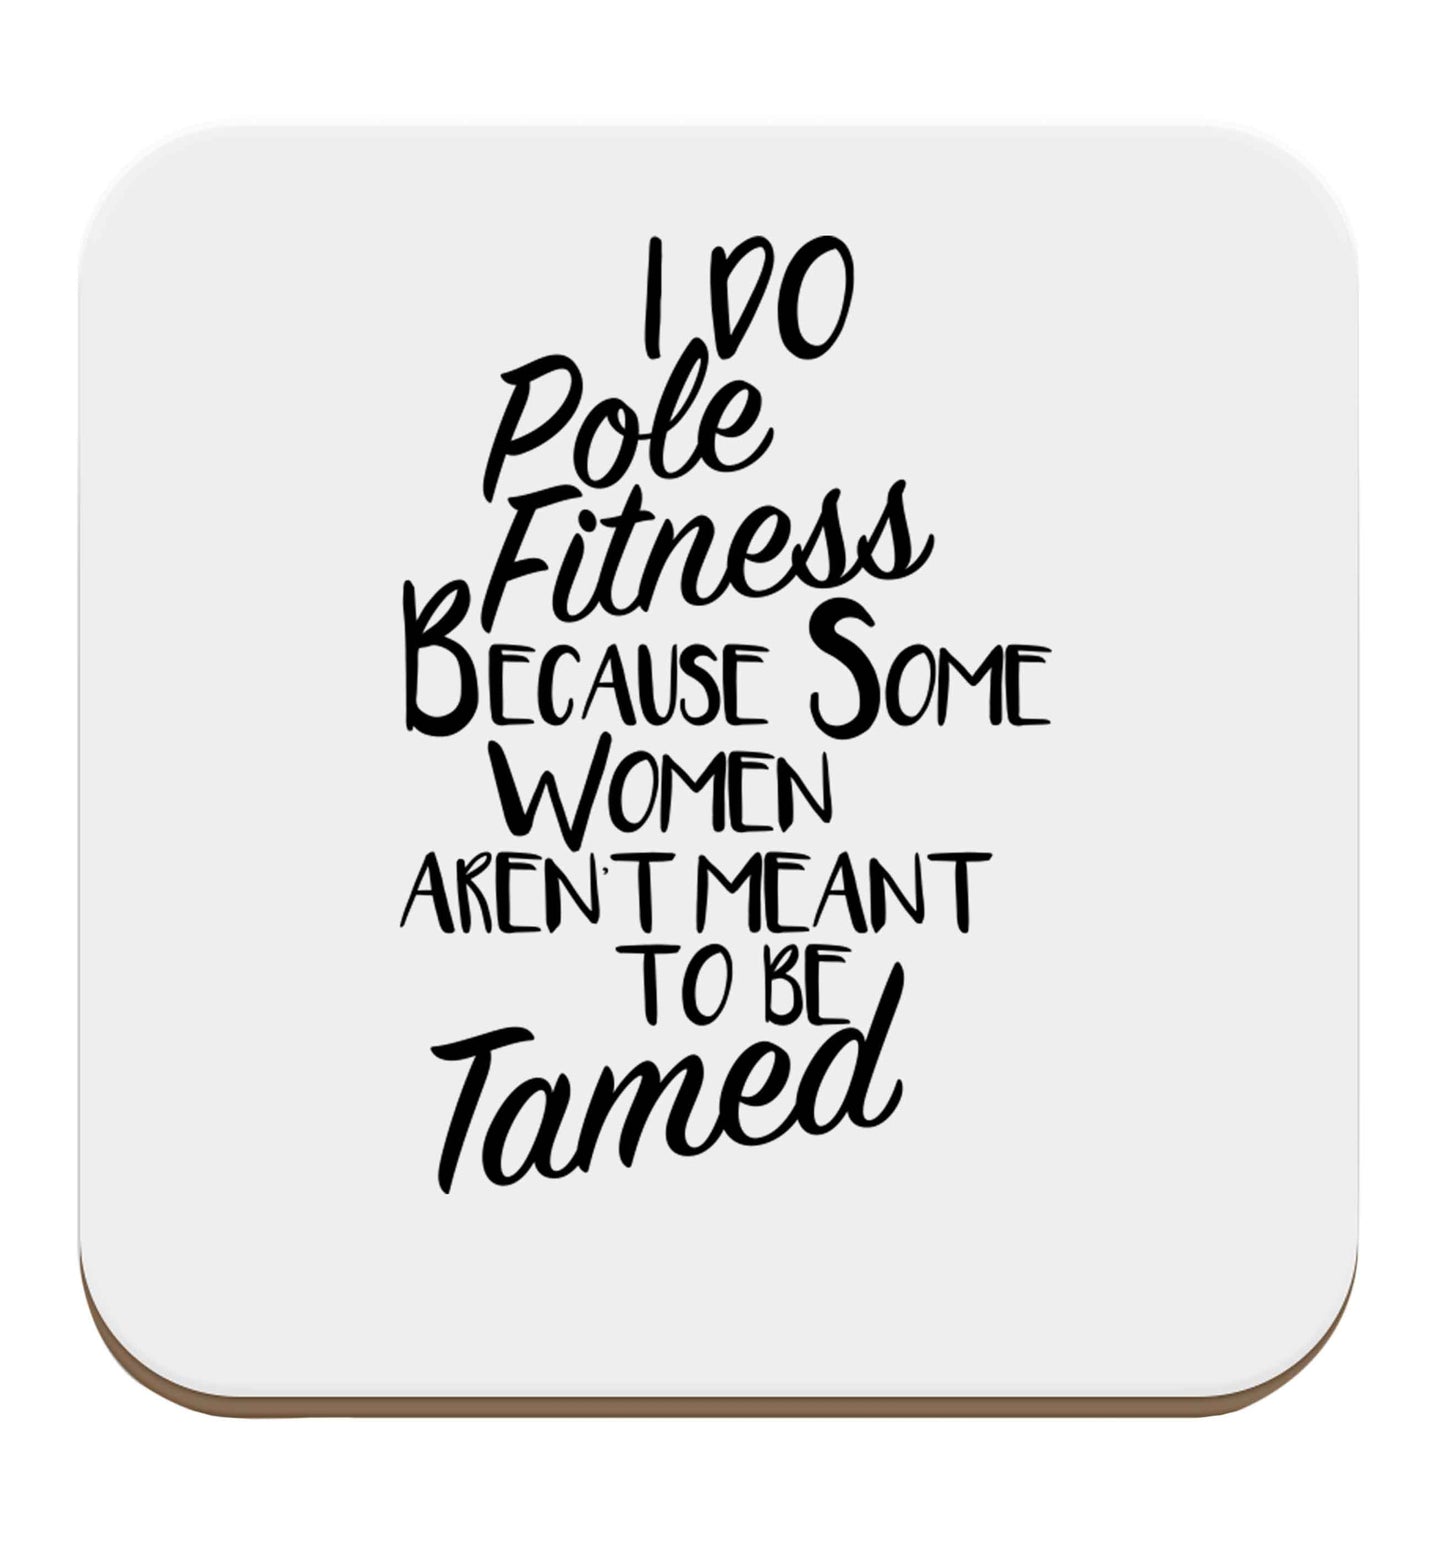 I do pole fitness because some women aren't meant to be tamed set of four coasters